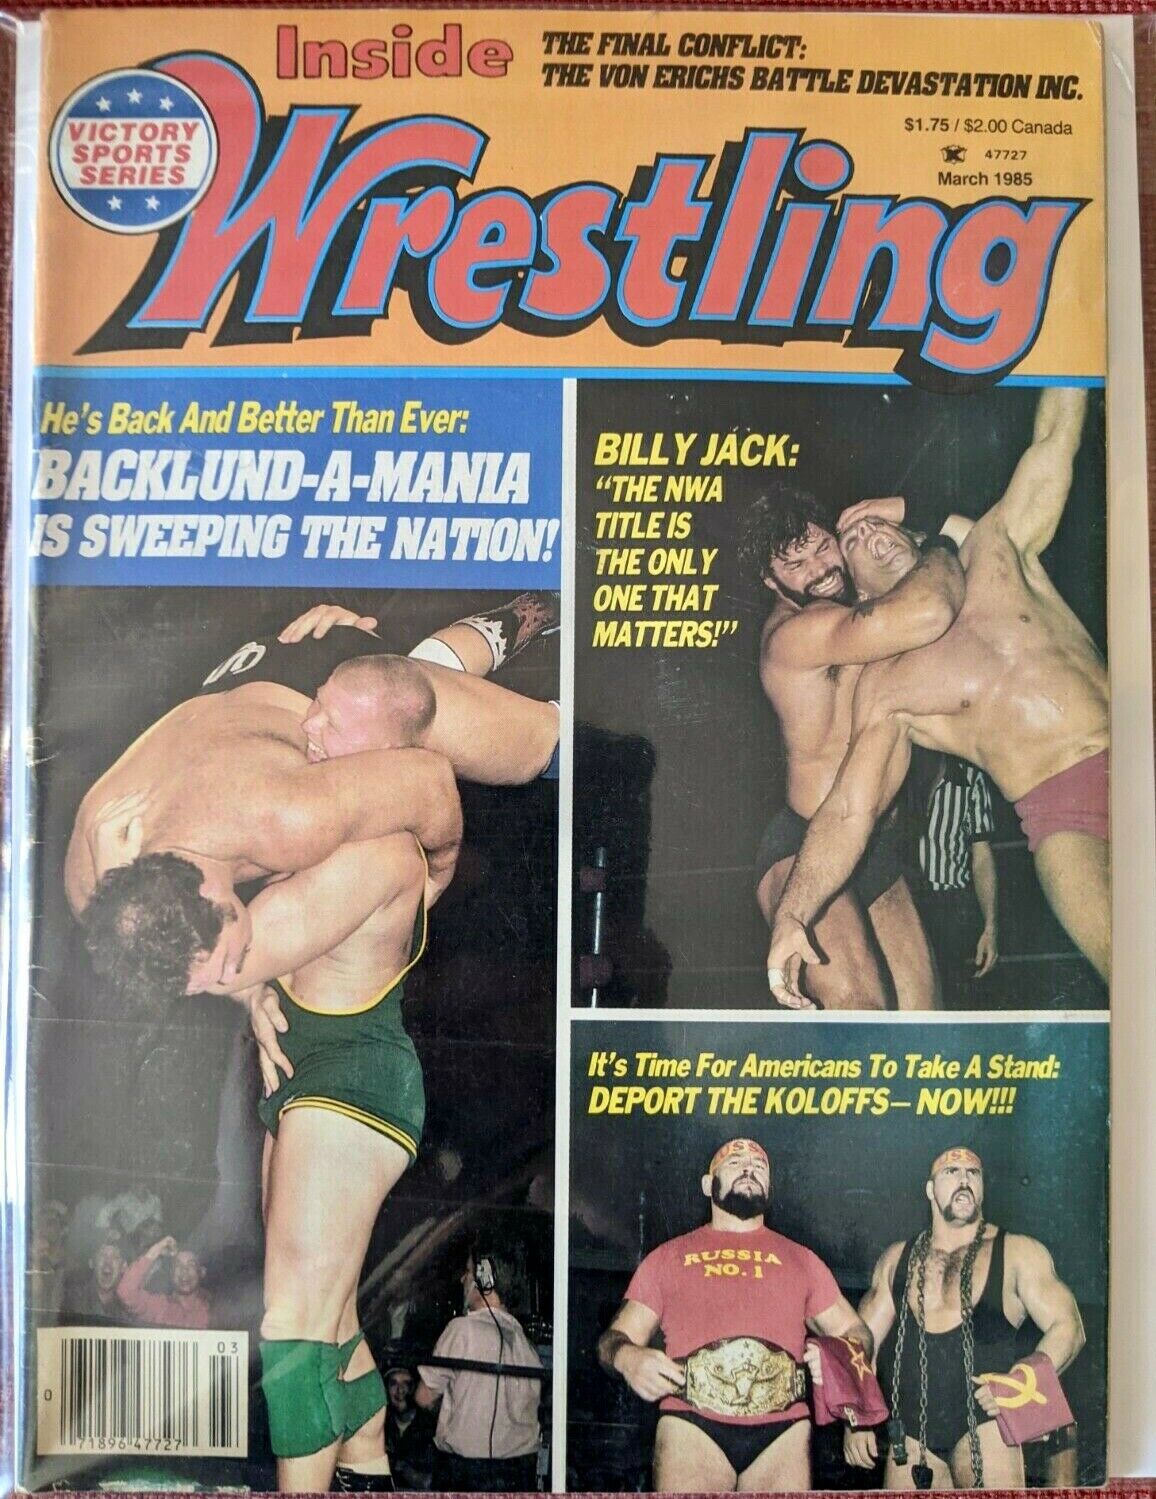 Inside Wrestling March 1985, Inside Wrestling March 1985 Magazine Back Issue Published by The Wrestling Federation, WWE & WWF. Backlund-a-mania is sweeping the nation!., Backlund-a-mania is sweeping the nation!